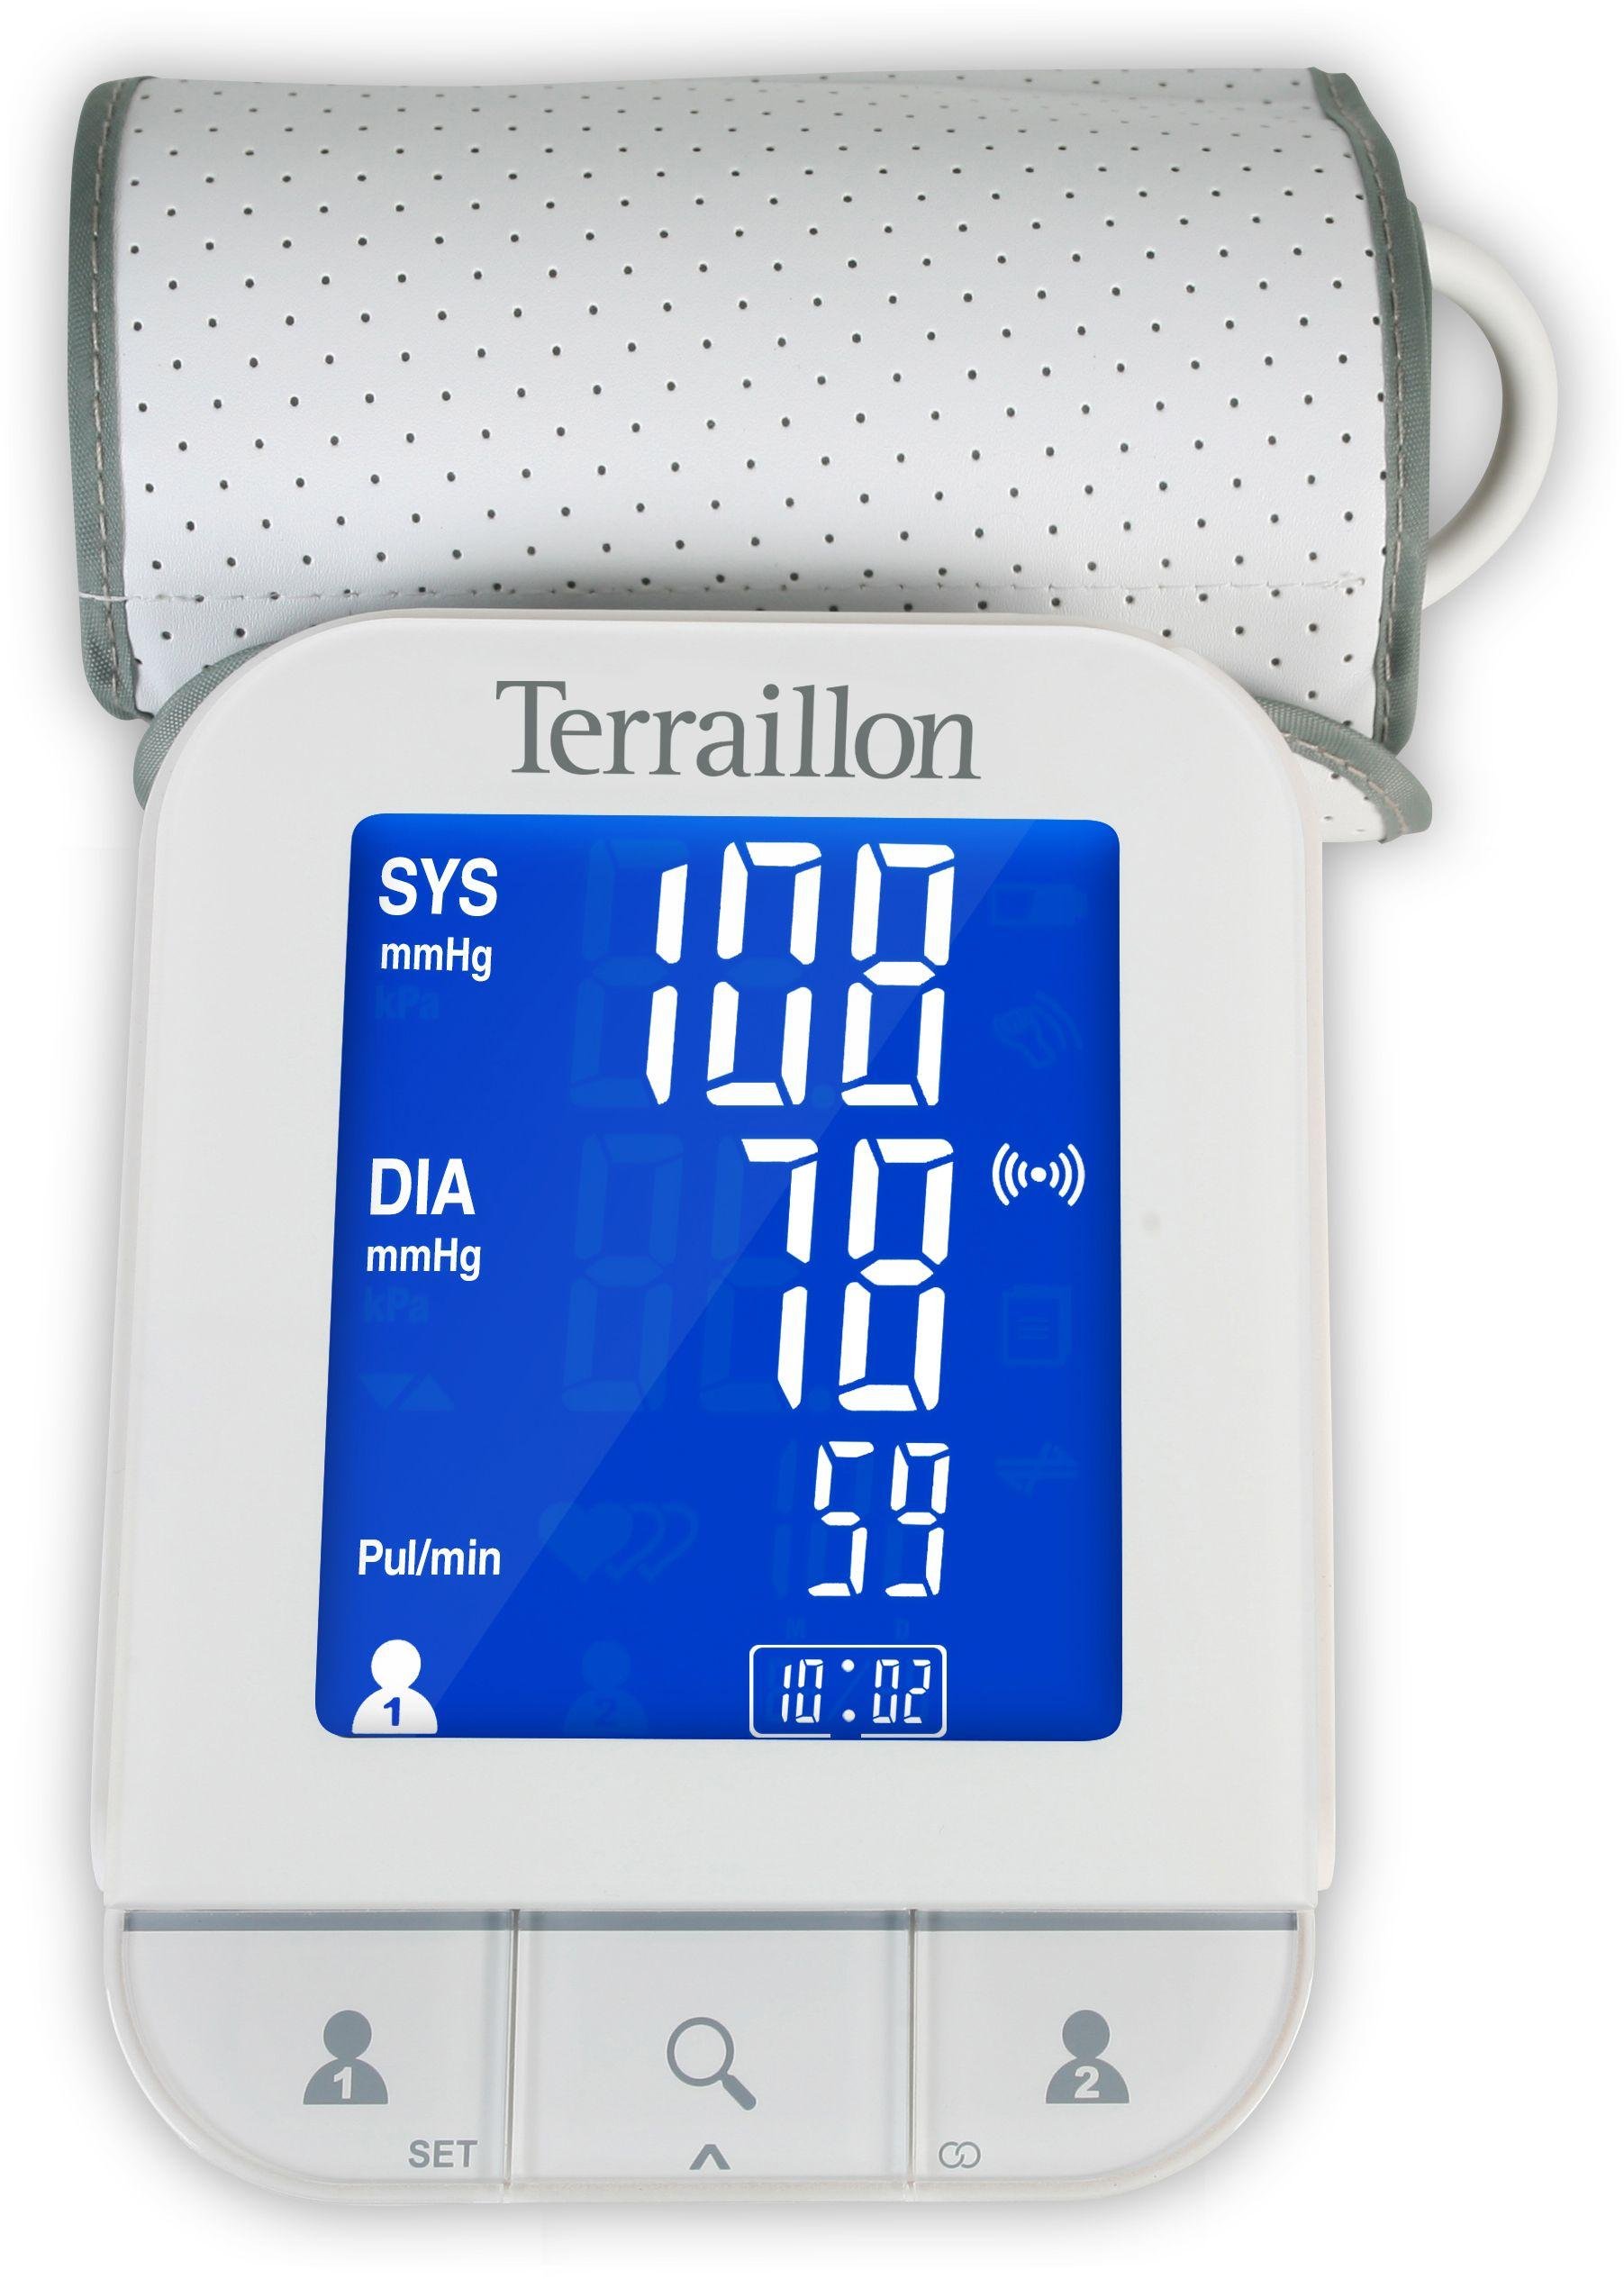 Tensio Arm Blood Pressure and Heart Rate Monitor